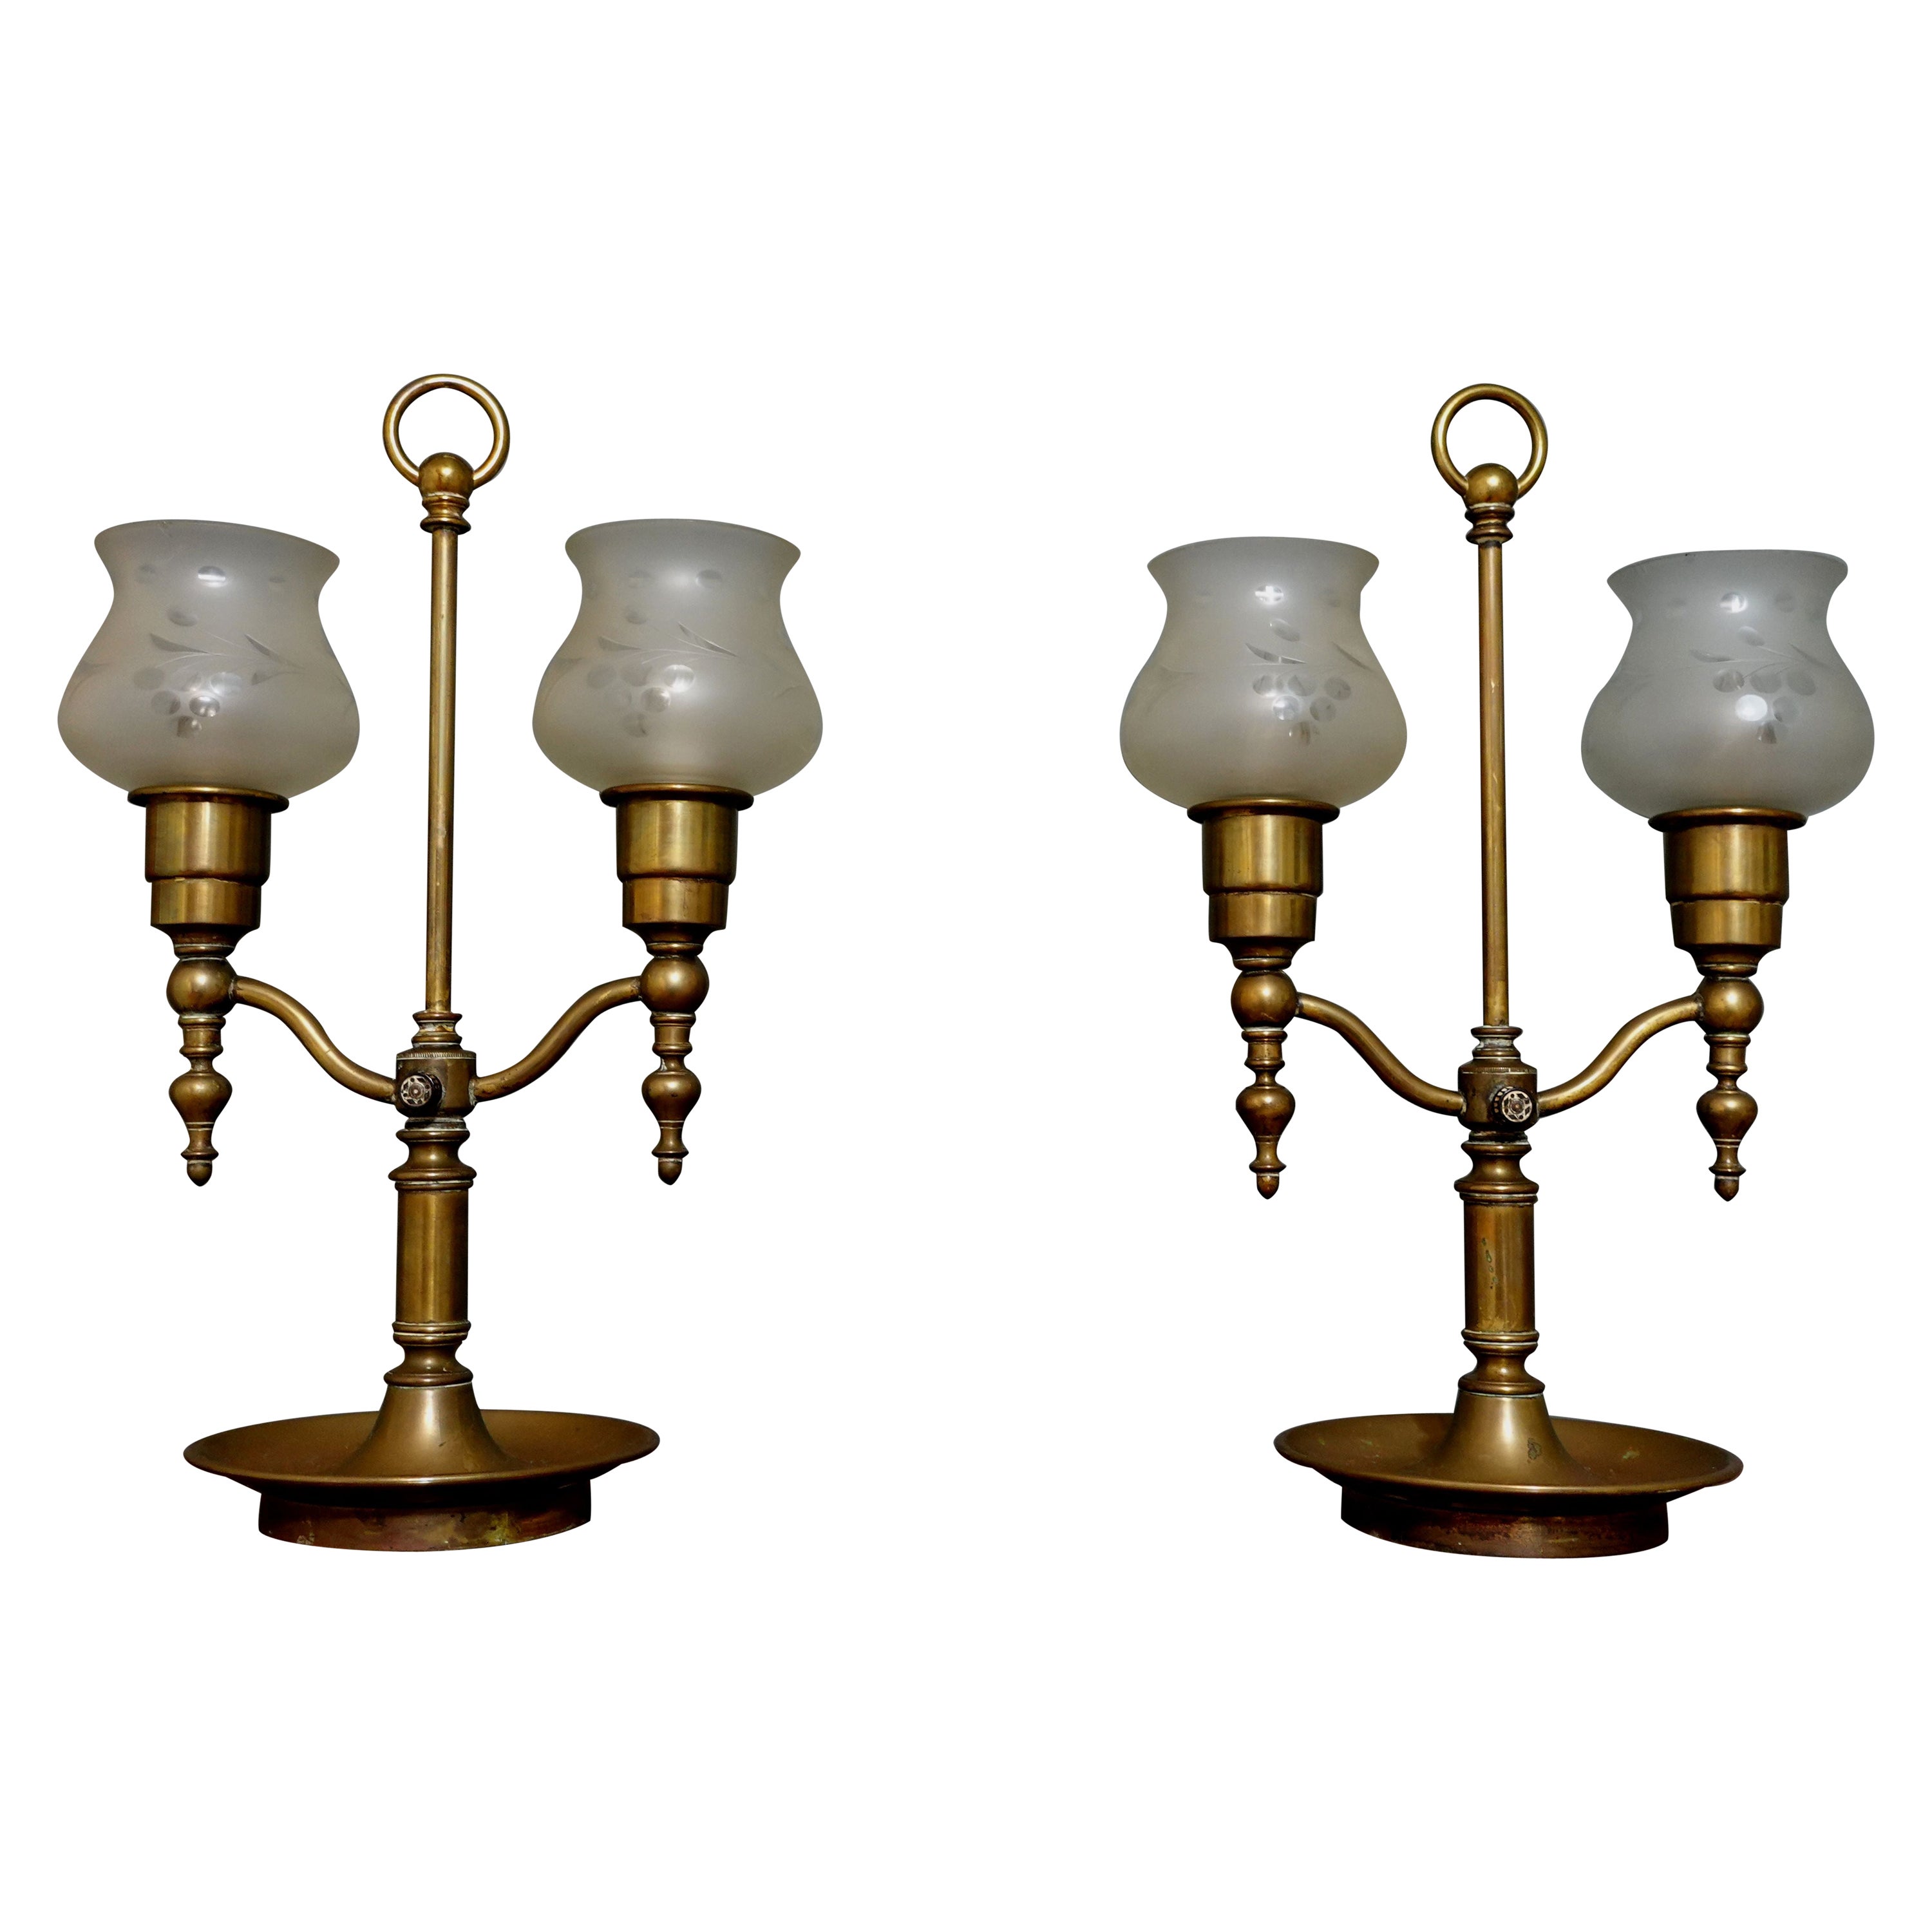 Antique Pair of Large Double Arm Brass Hurricane Lamps, 1900s For Sale